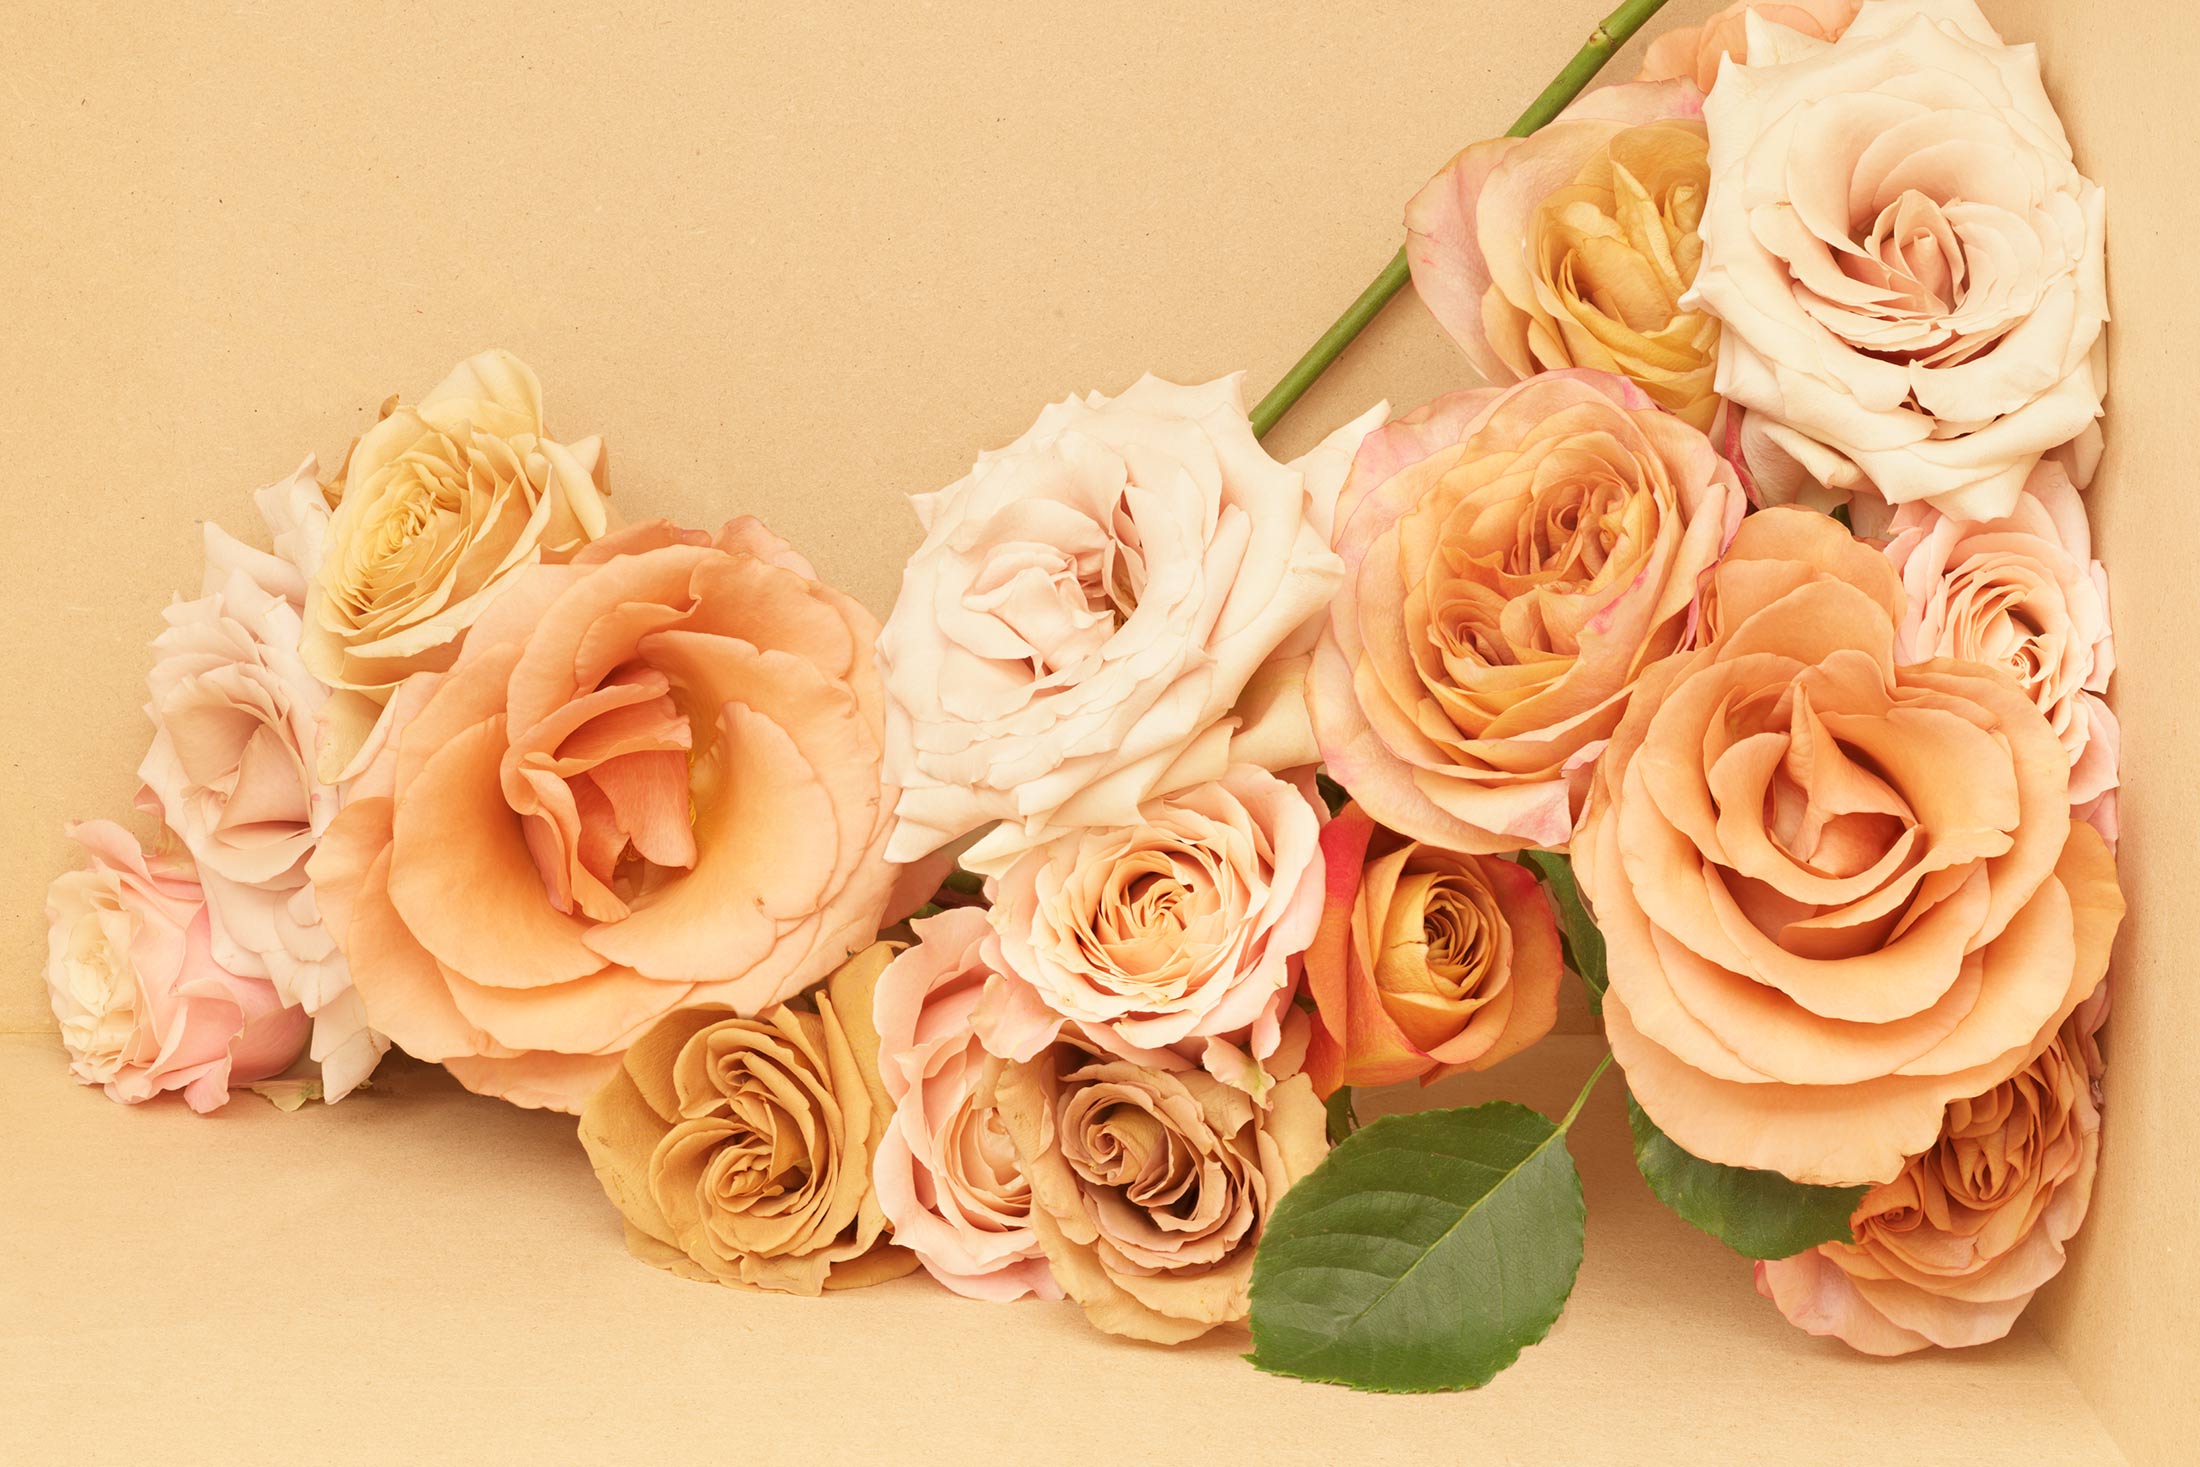 Wholesale plastic rose stems To Decorate Your Environment